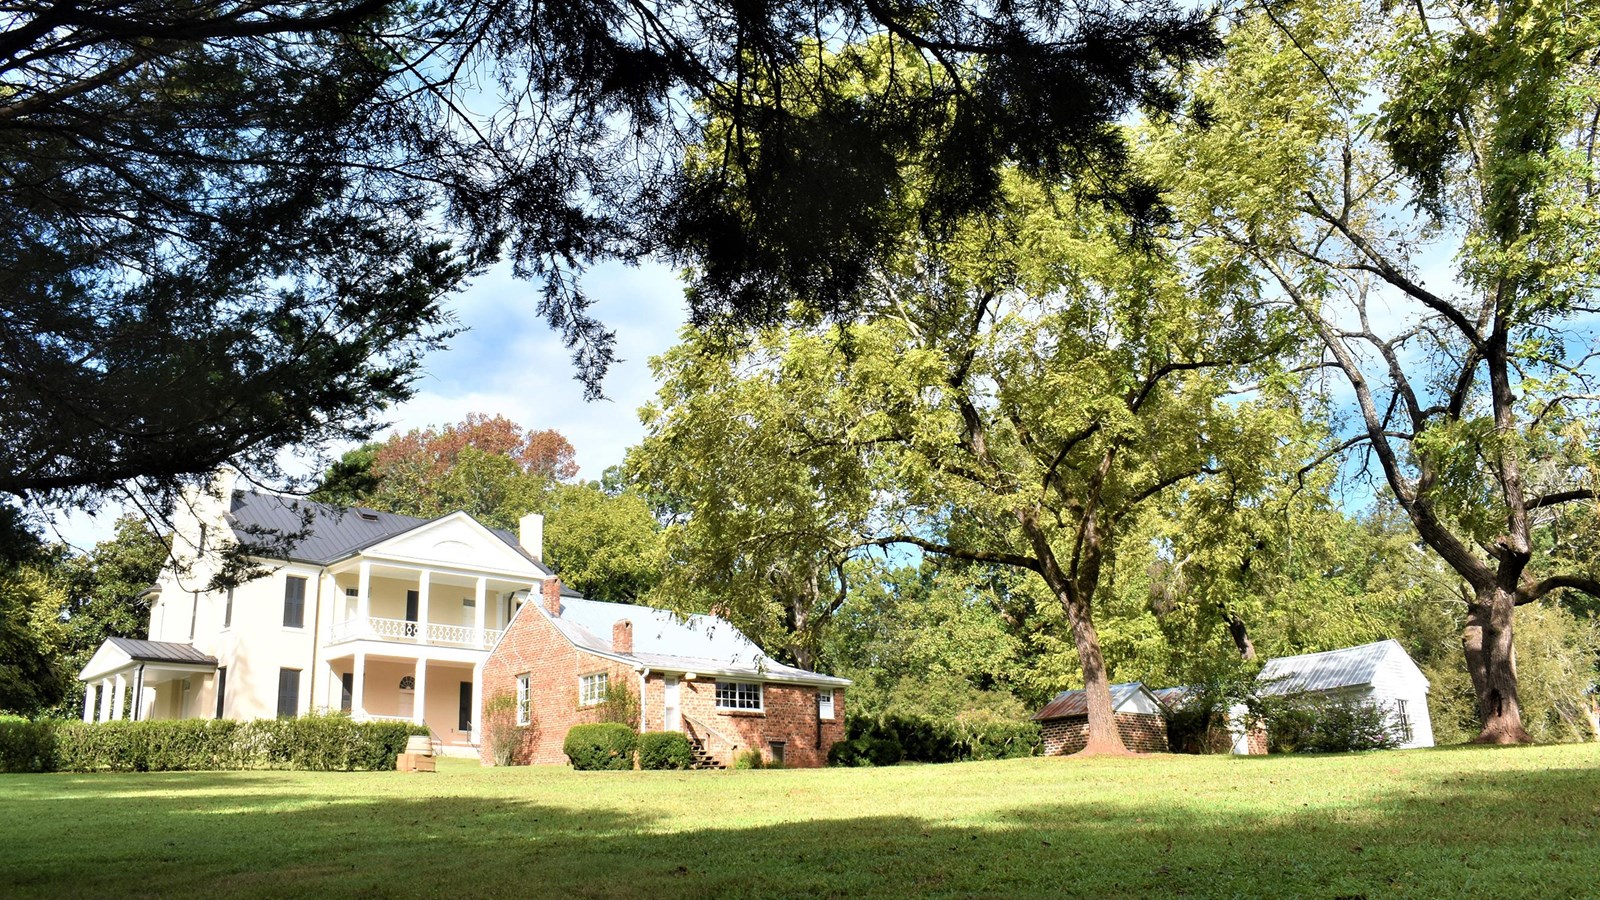 A large plantation house surrounded by smaller brick buildings and trees